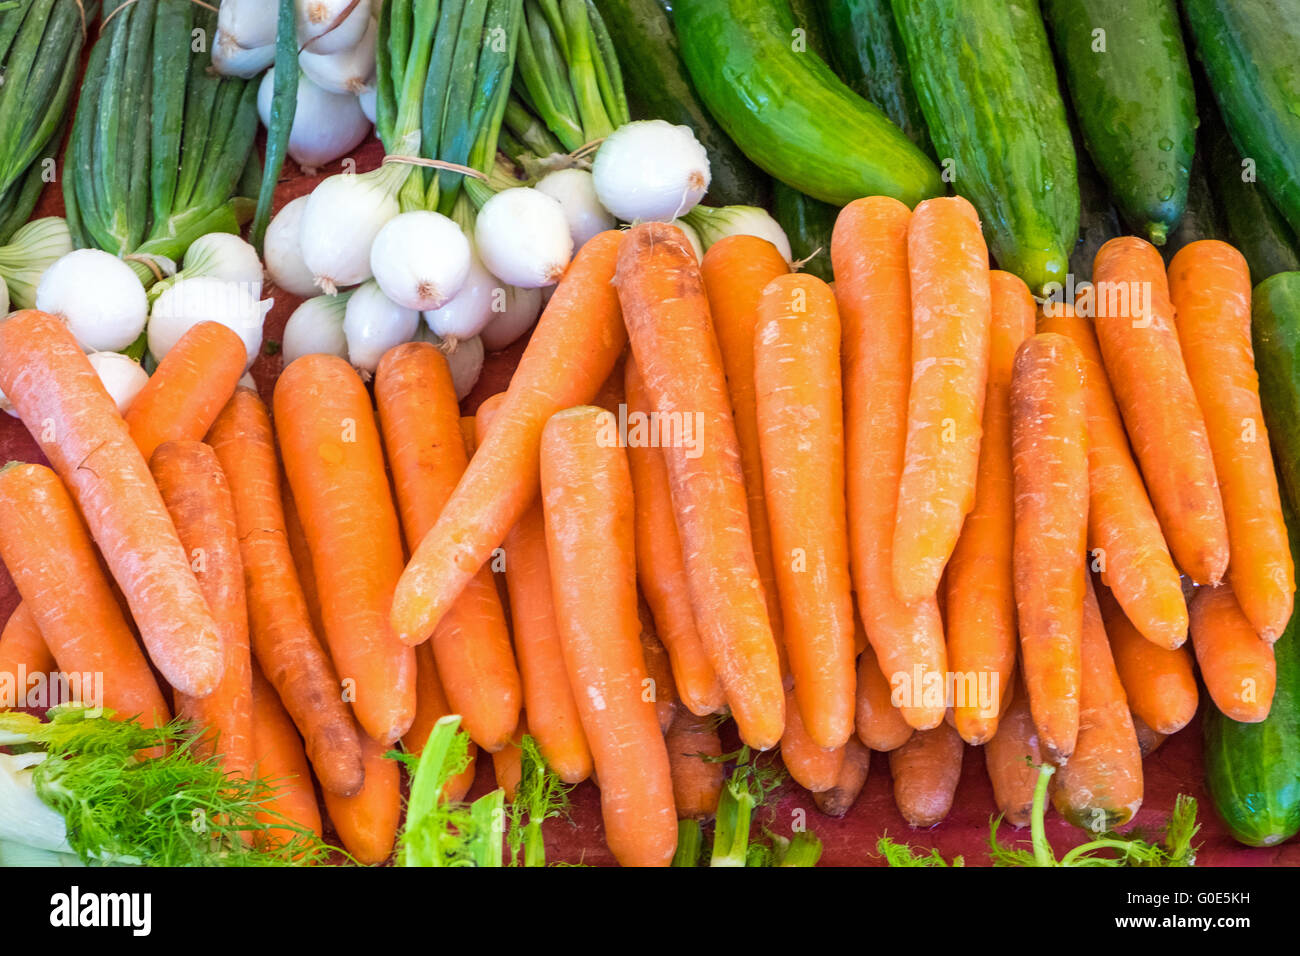 Carrots and cucumber for sale at a market Stock Photo